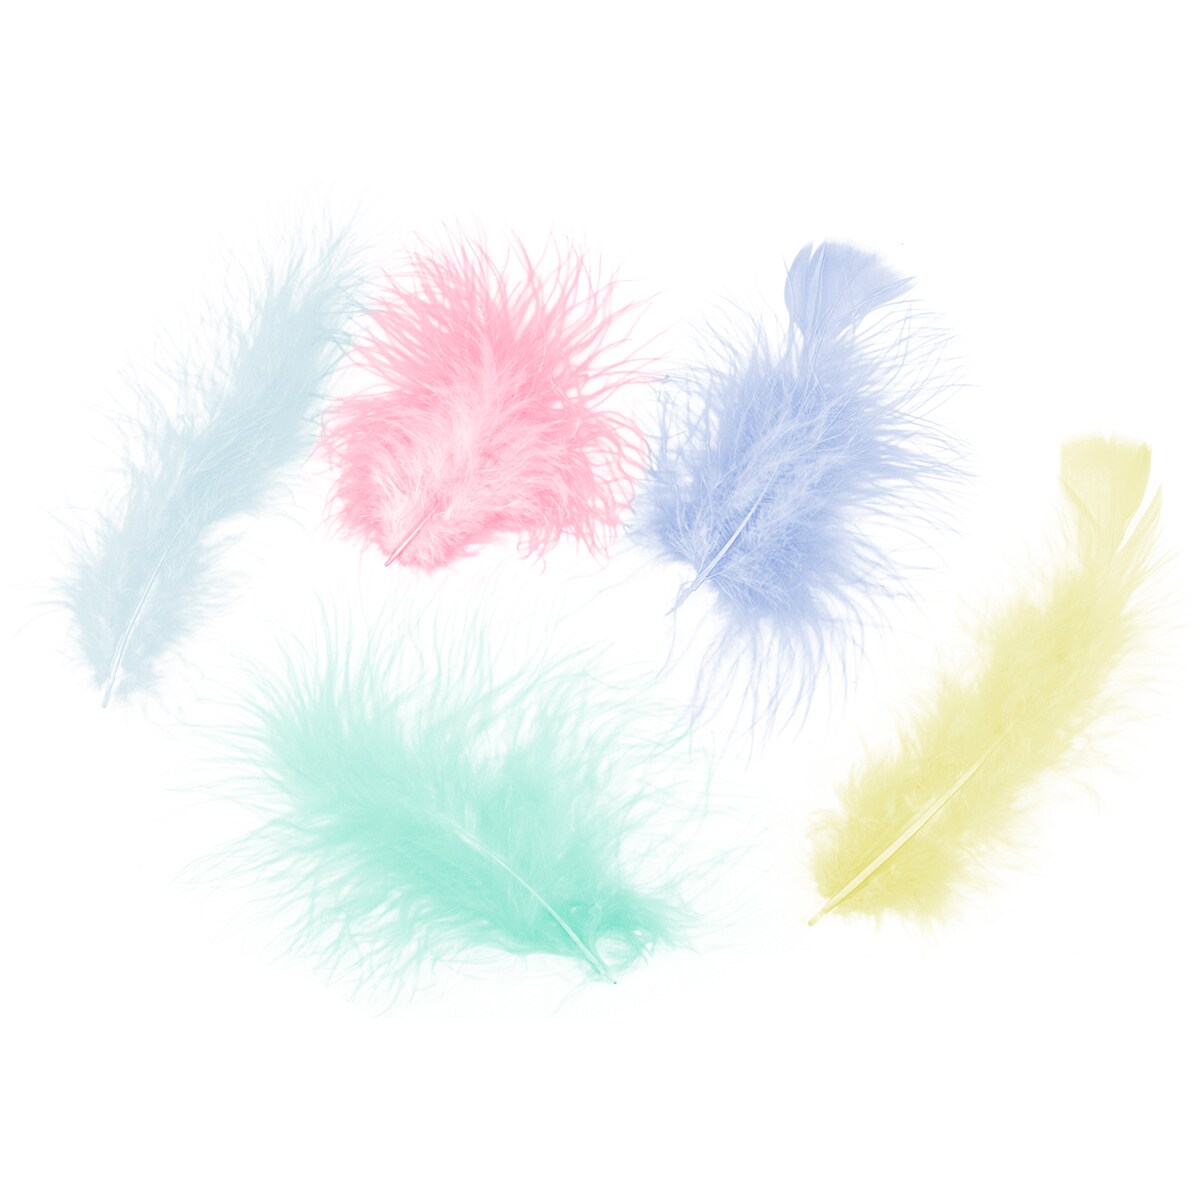 Rainbow Craft Goose Feathers by Creatology™